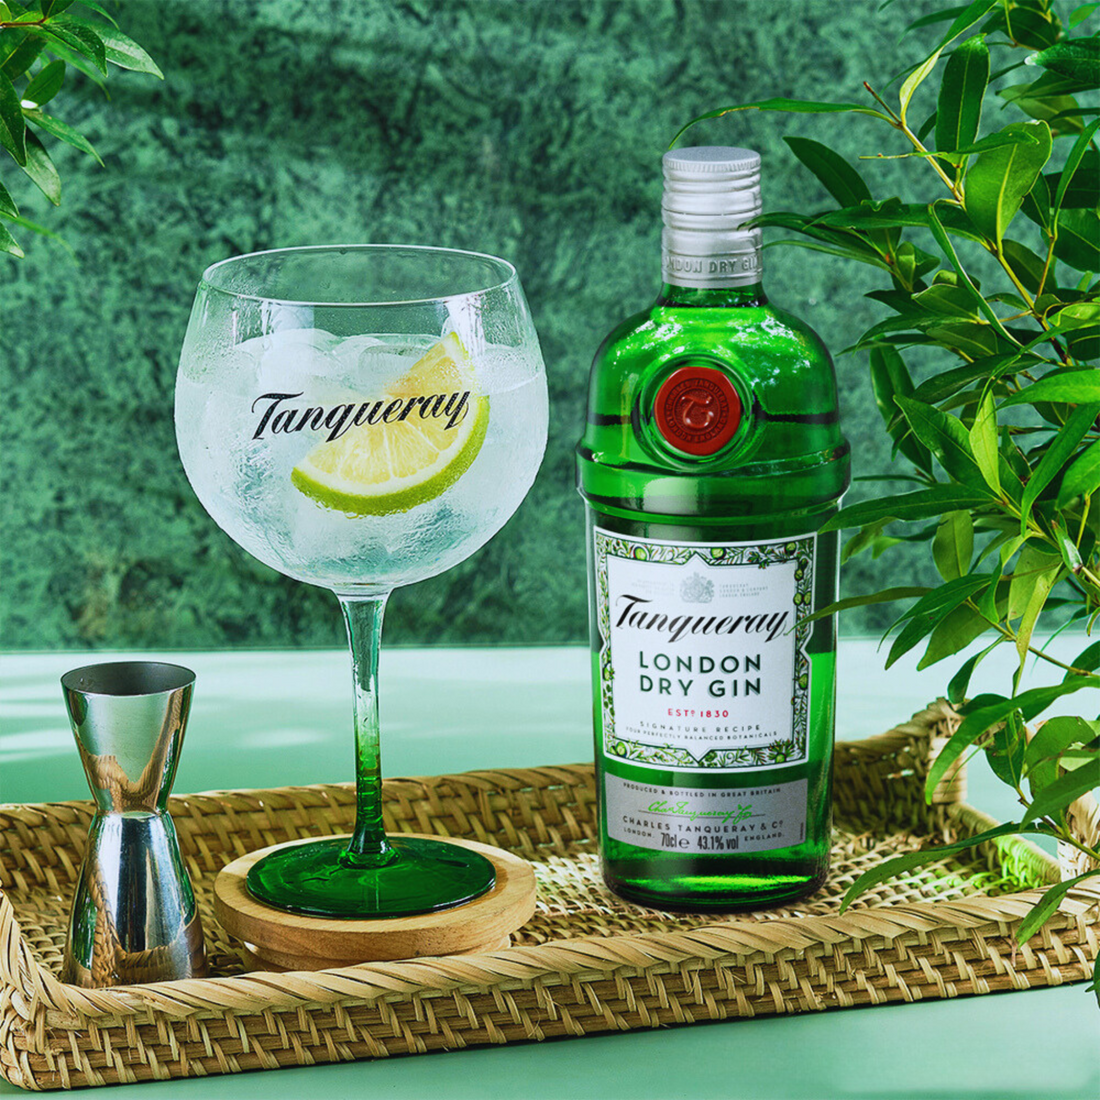 Tanqueray London Dry Gin, 750mL